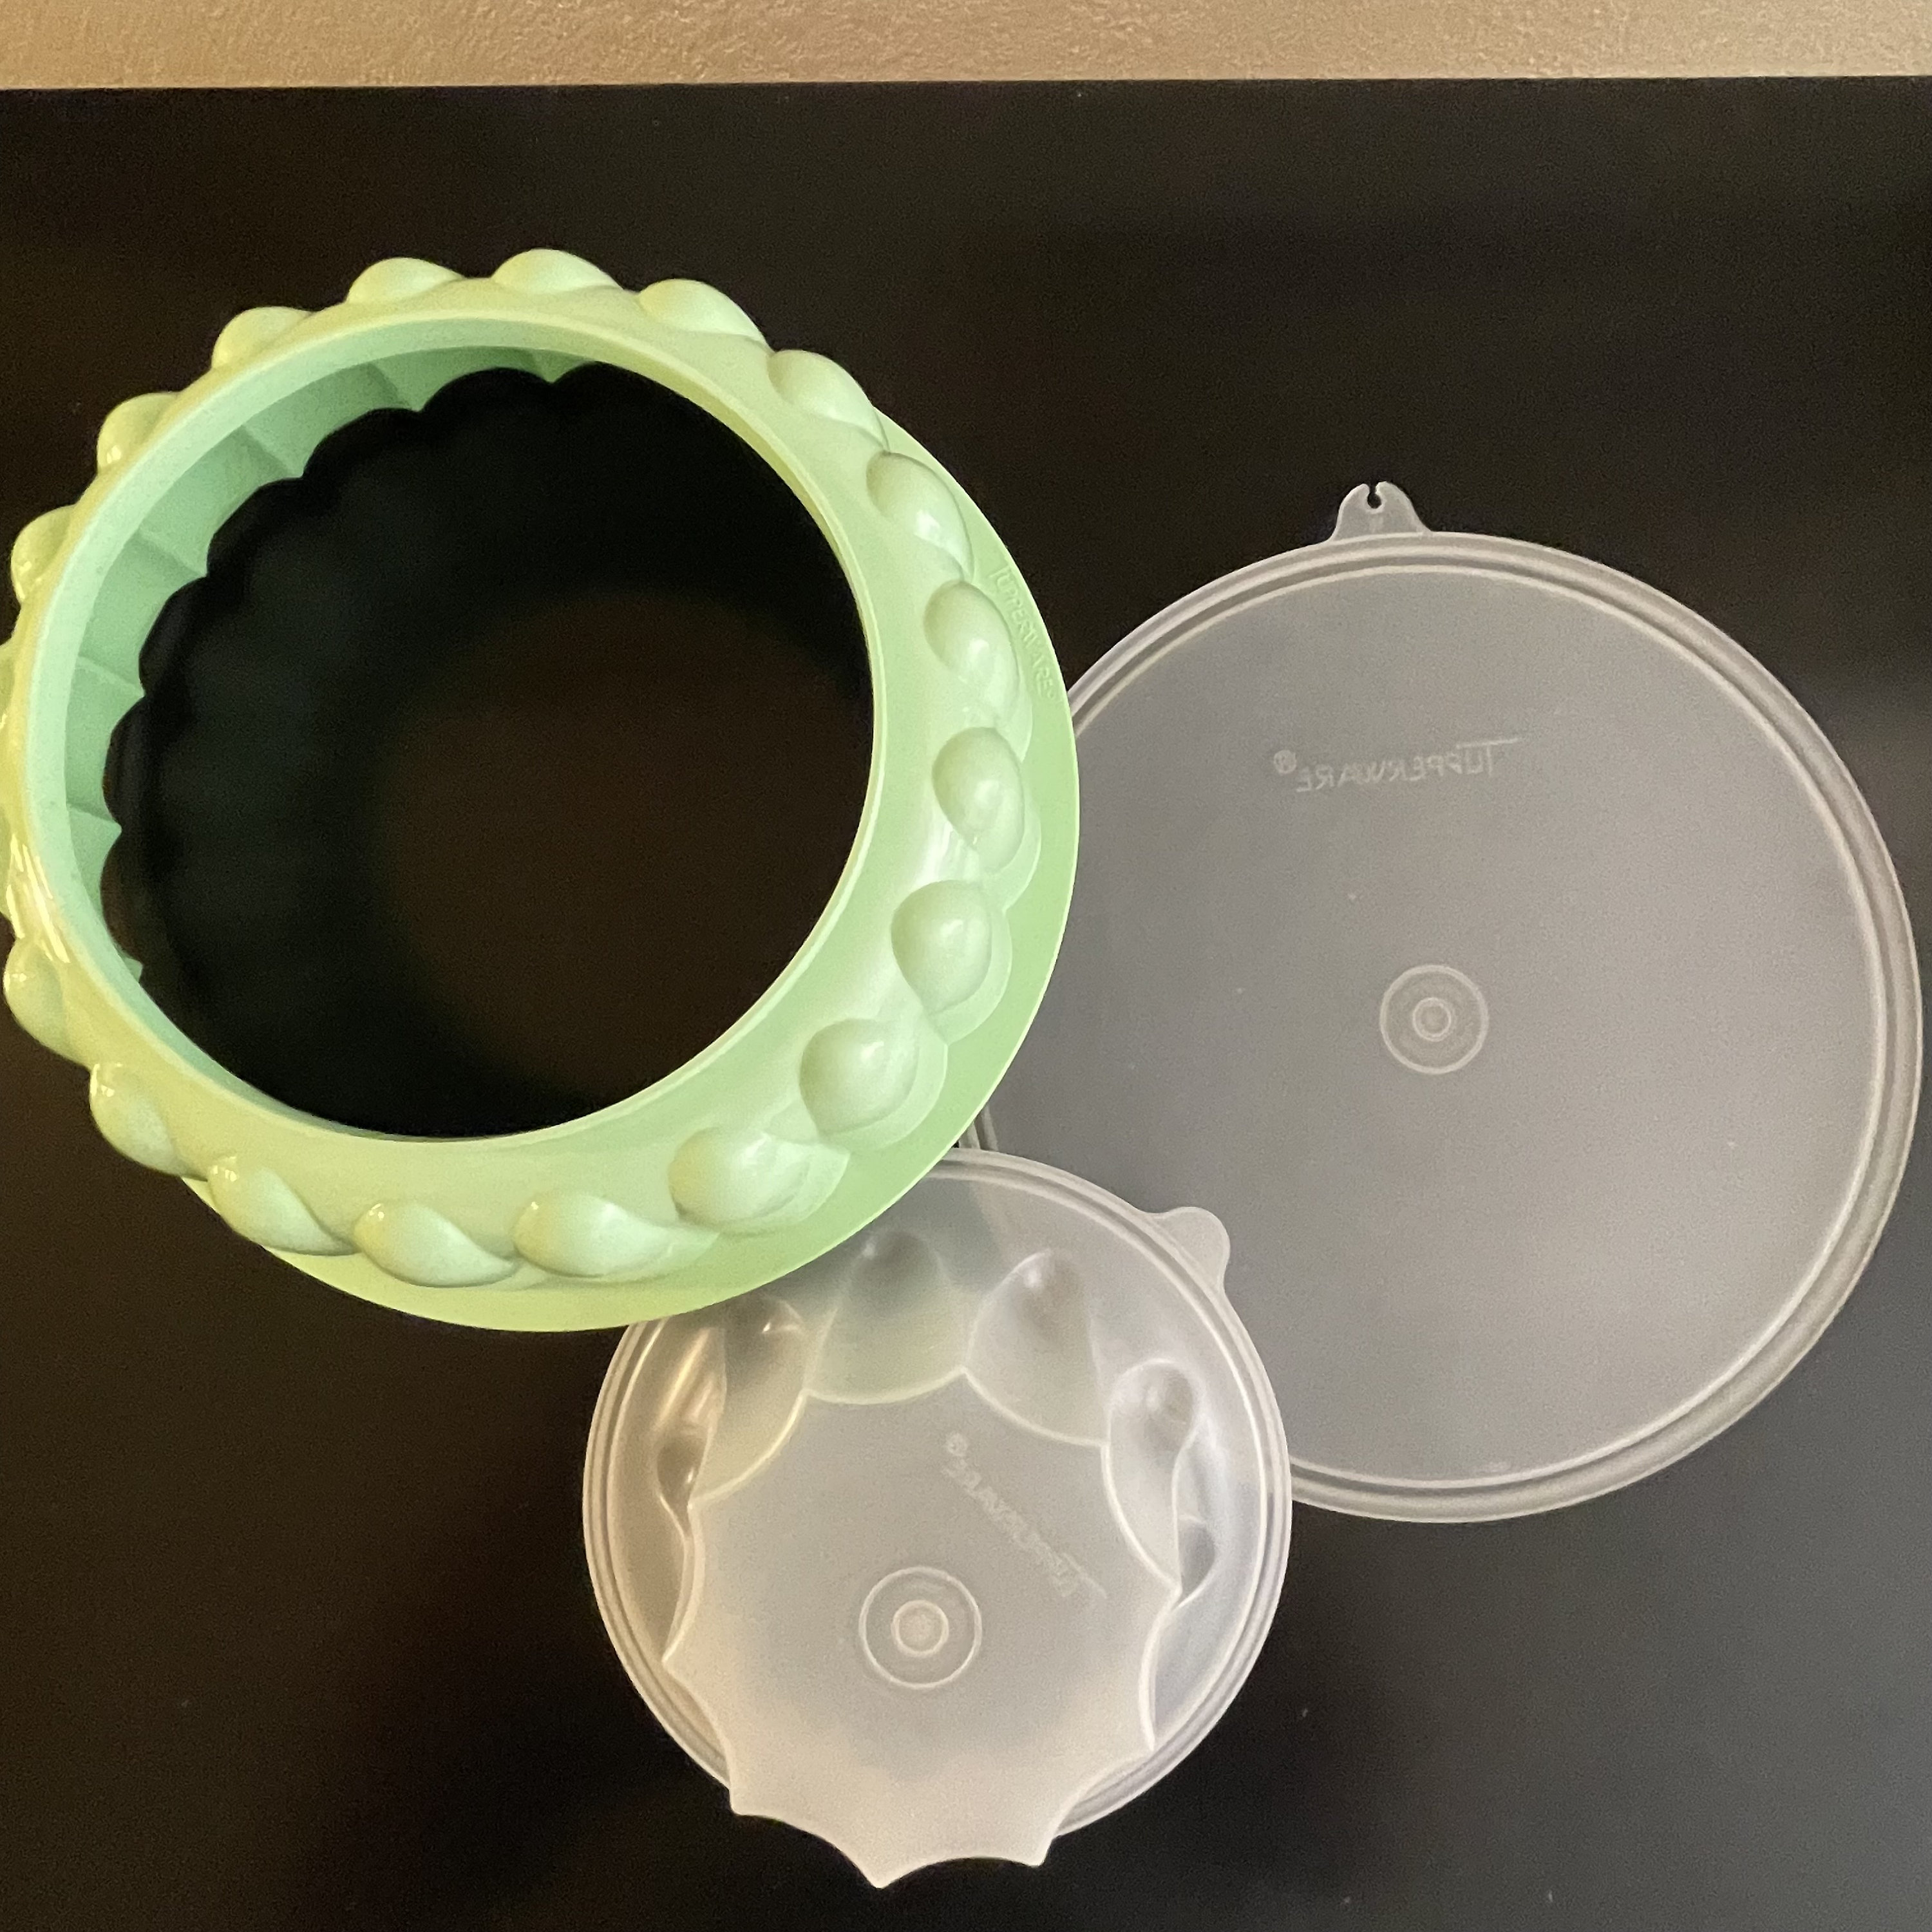 Save That Jel-Ring Mold! Why Tupperware May Be Going Away Forever